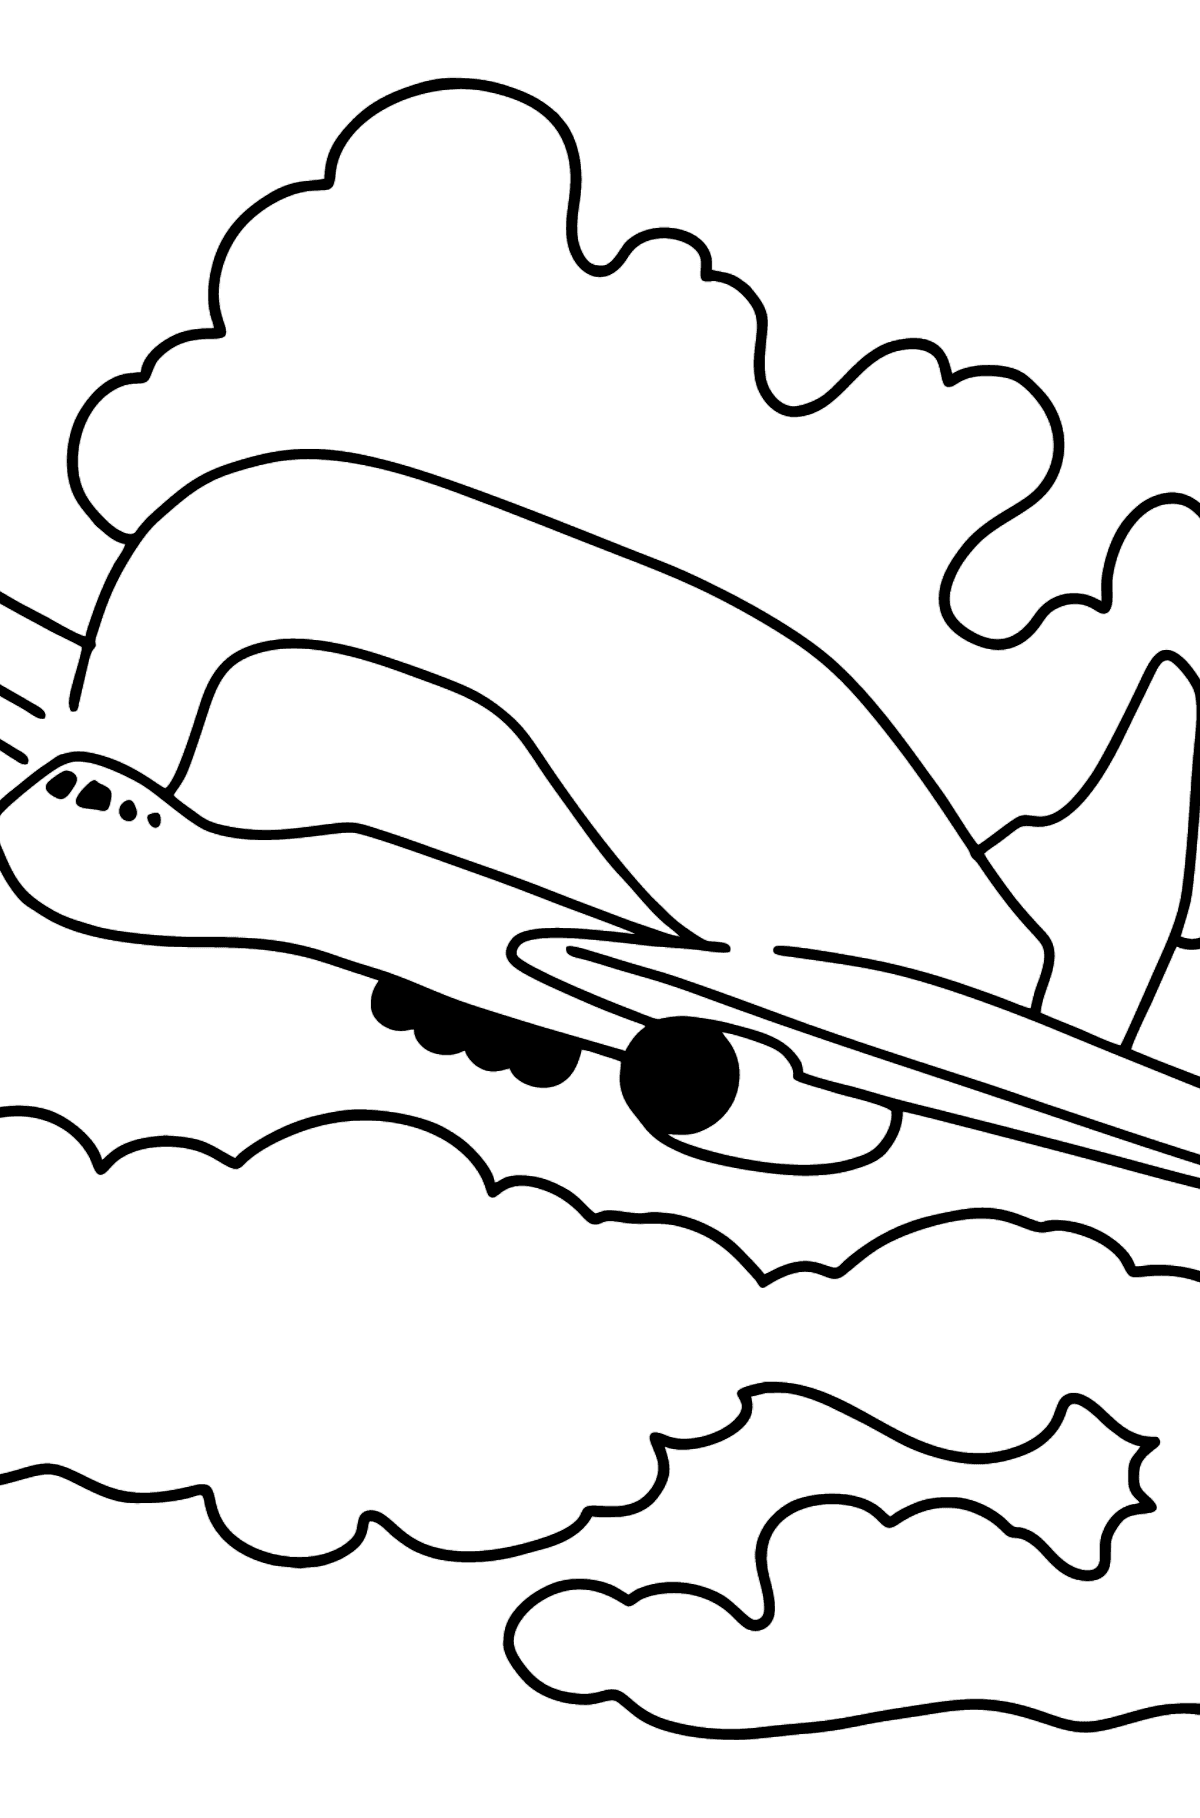 Cargo Plane coloring page - Coloring Pages for Kids